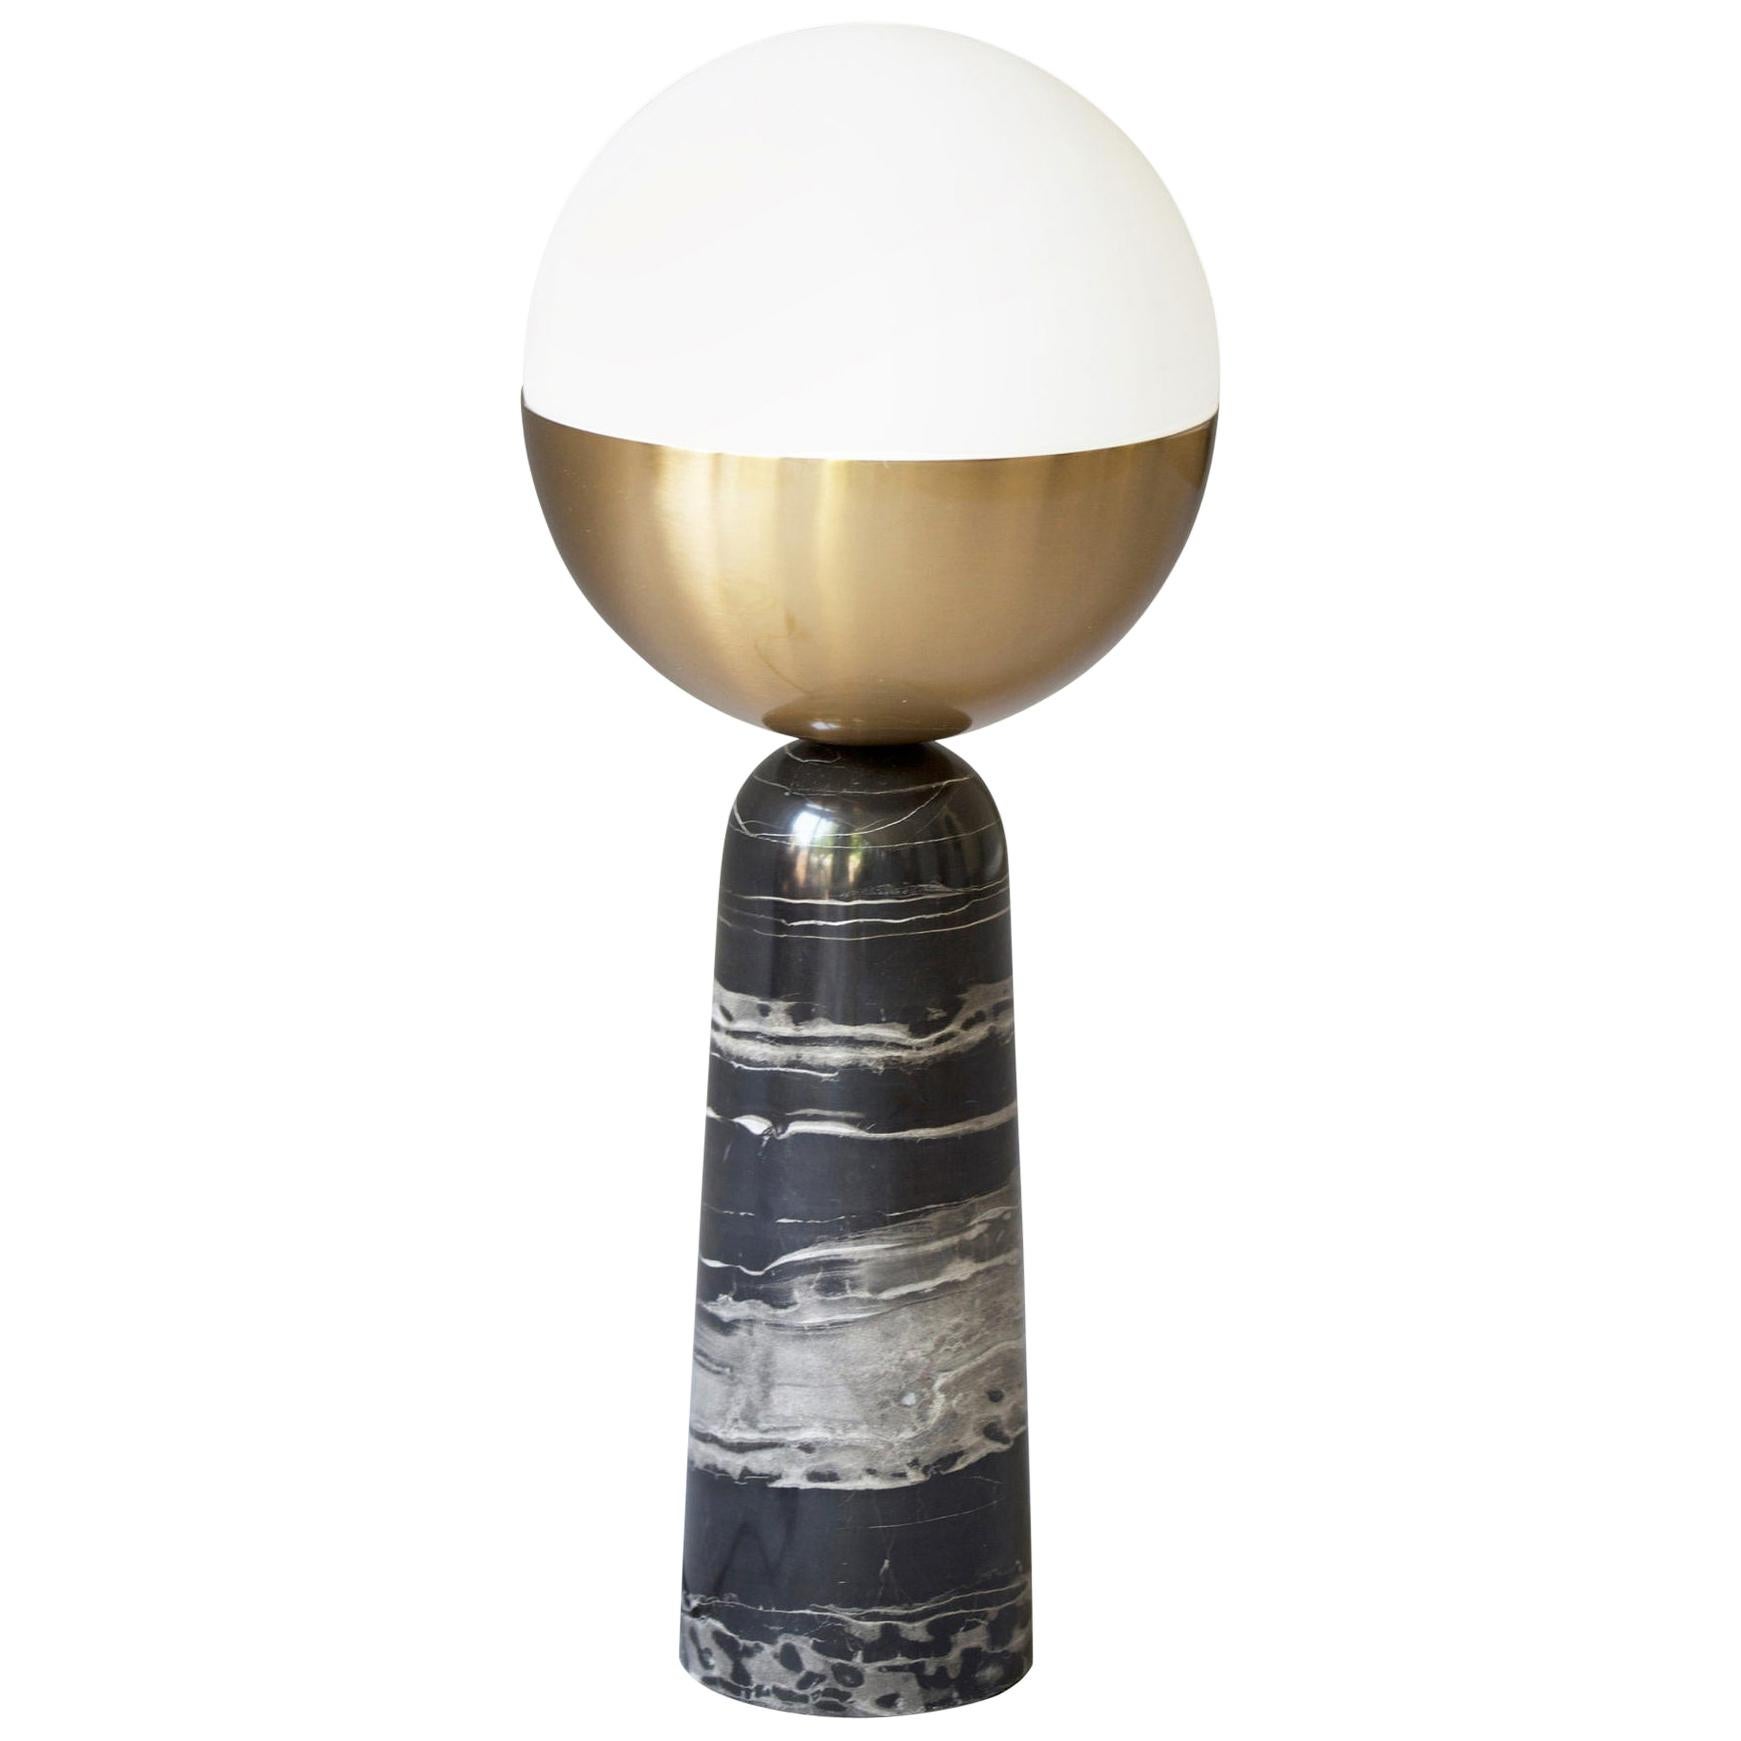 Brass "Globe" Table Lamp, Square in Circle